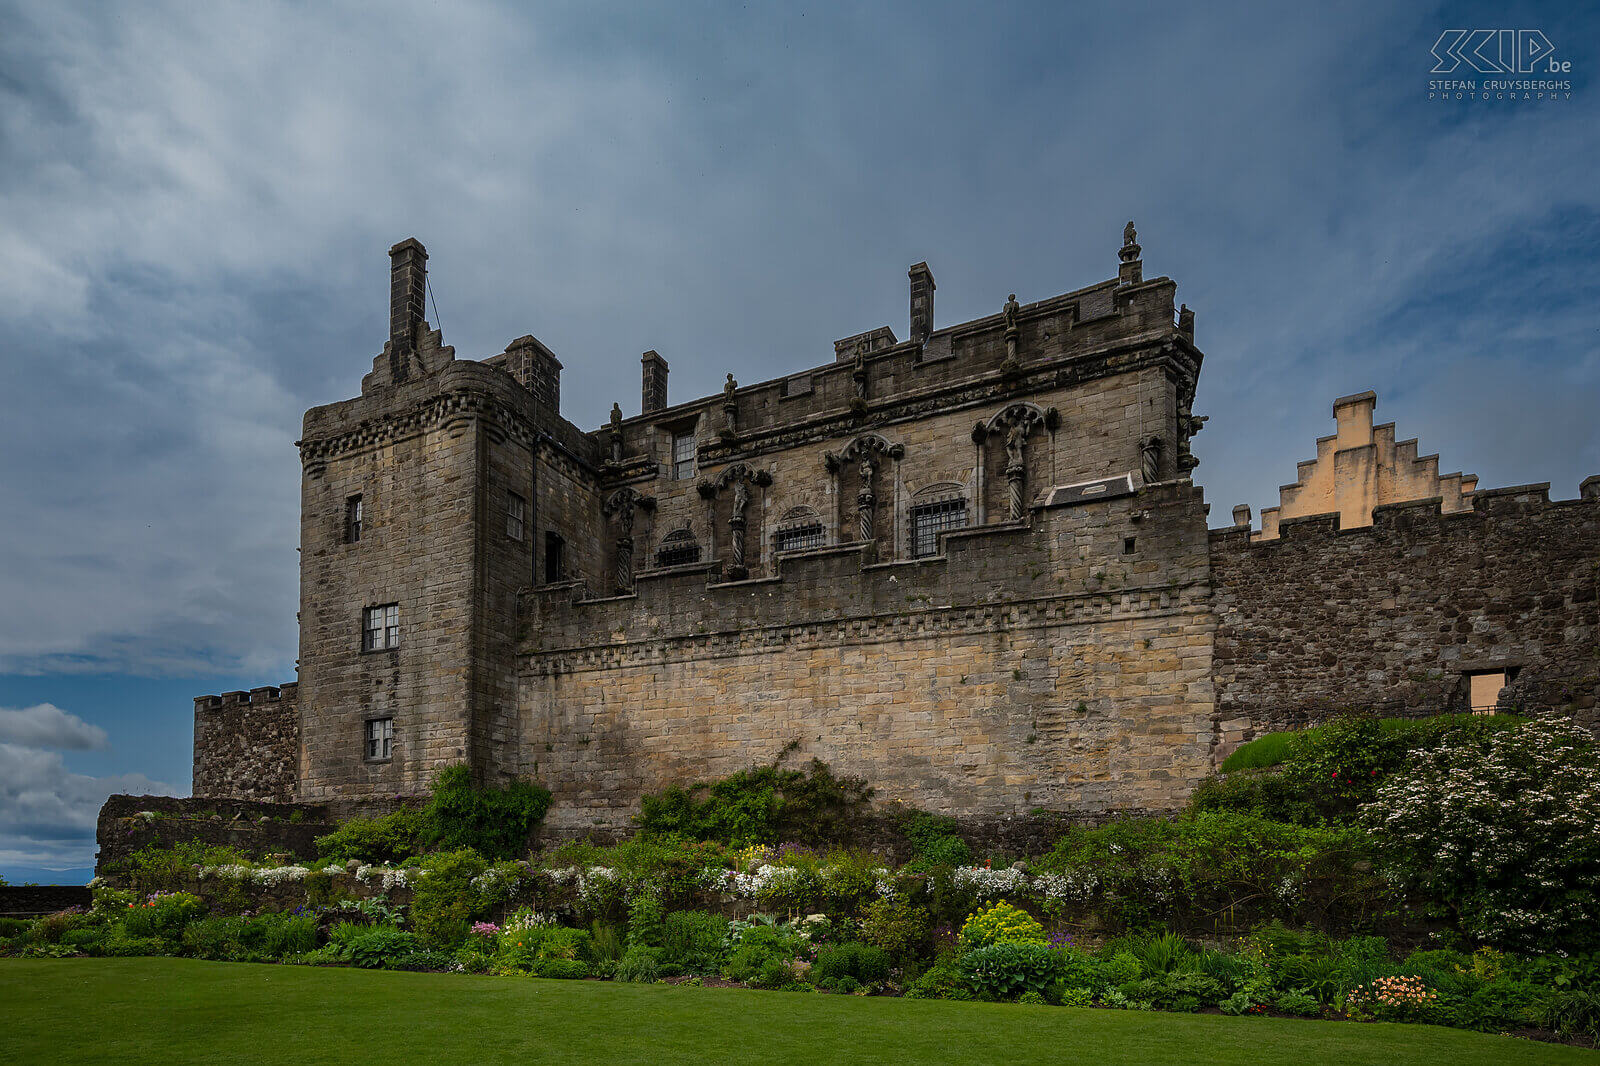 Stirling Castle The impressive Stirling Castle sits atop a large volcanic rock in the town of Stirling. Here William Wallace defeated the English army in 1297. He thus gave the Scots the idea of being a separate nation. Stefan Cruysberghs